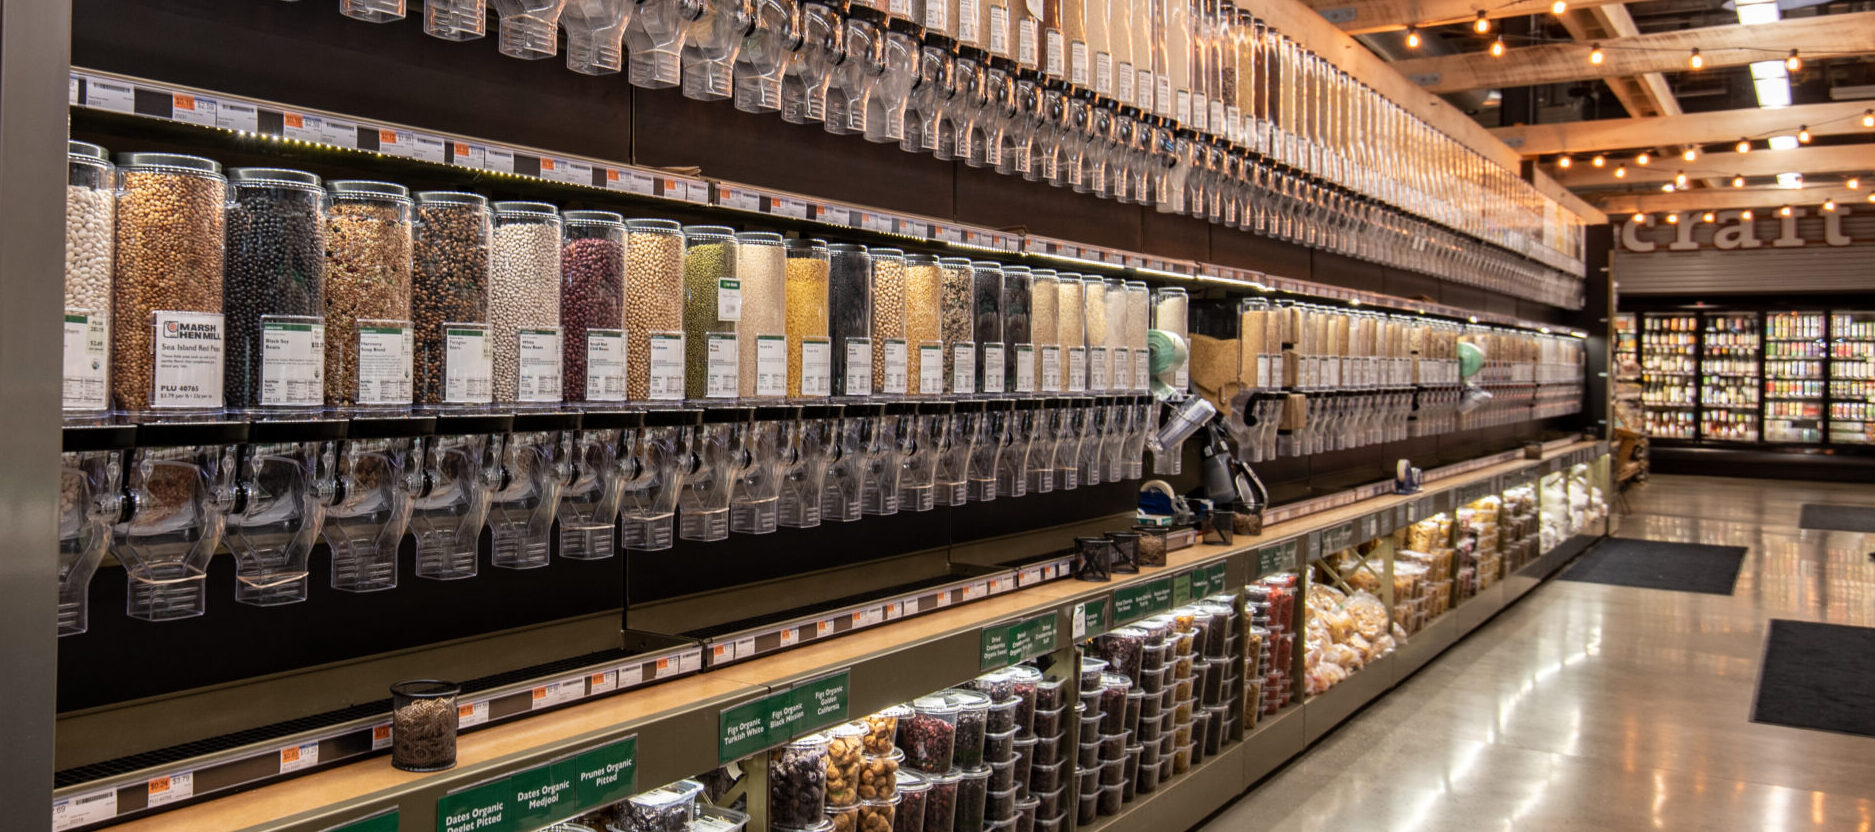 A photo of a store aisle with gravity bins lining the wall.